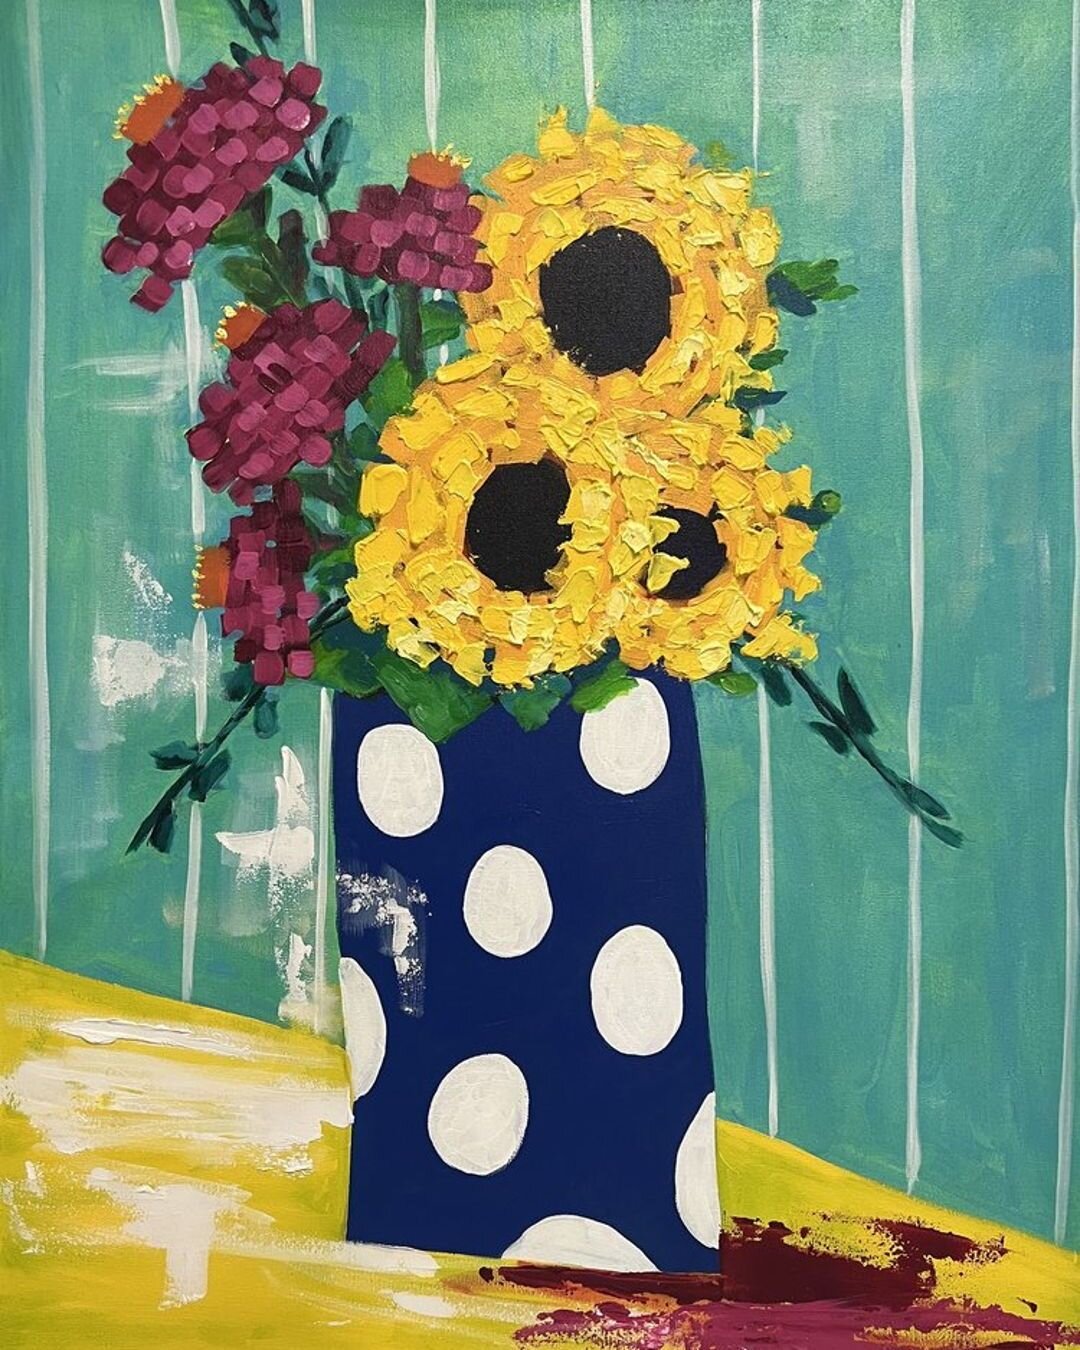 I &quot;Promise&quot; you'll love this painting even more in person! 🤩 Acrylic painting of flowers in blue polka dotted vase. 30 x 40.&rdquo; Shipping and tax included.